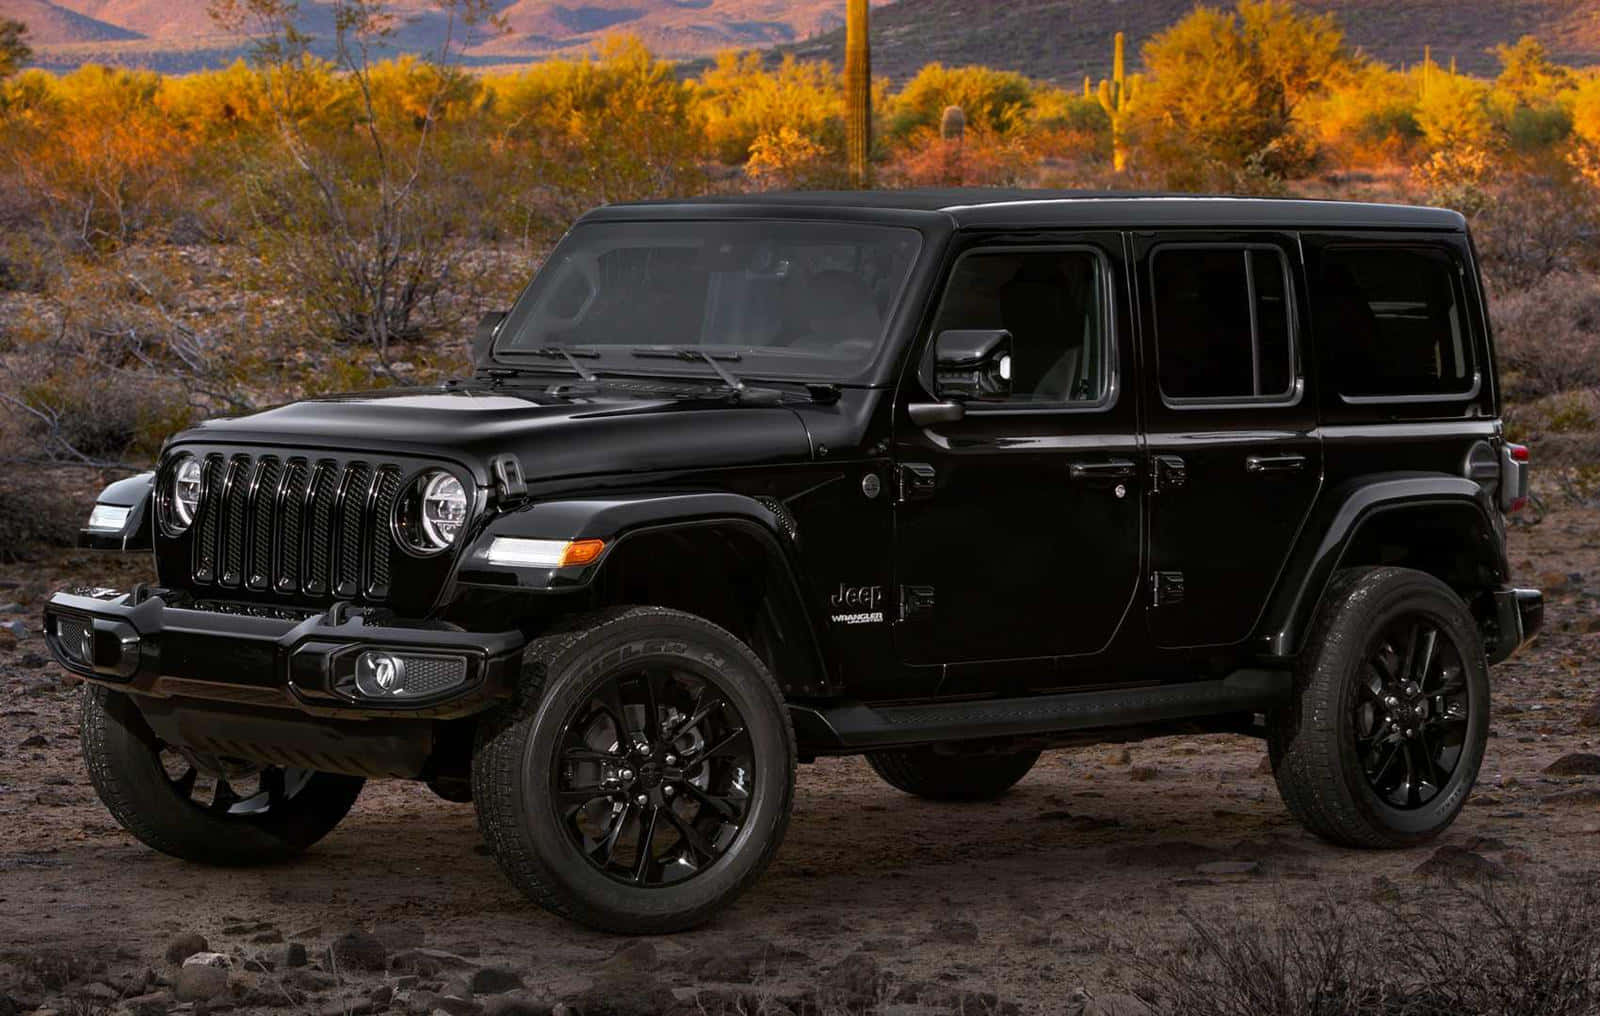 A Black Jeep Parked In The Desert